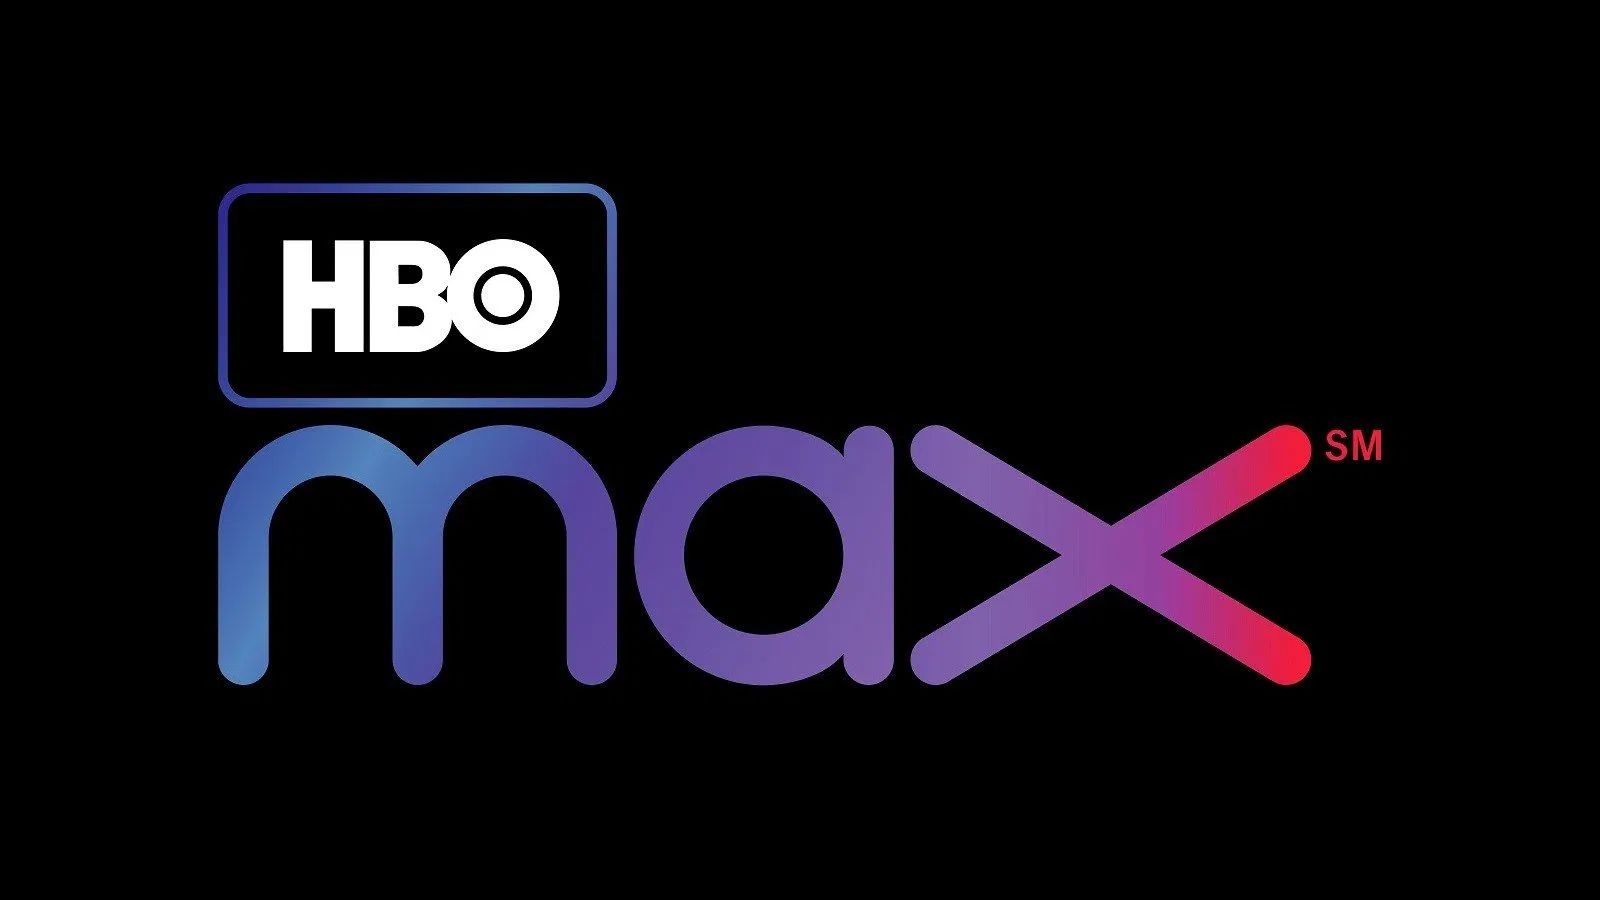 Apple TV+ Competitor HBO Max Launching in May 2020 for $15 per Month